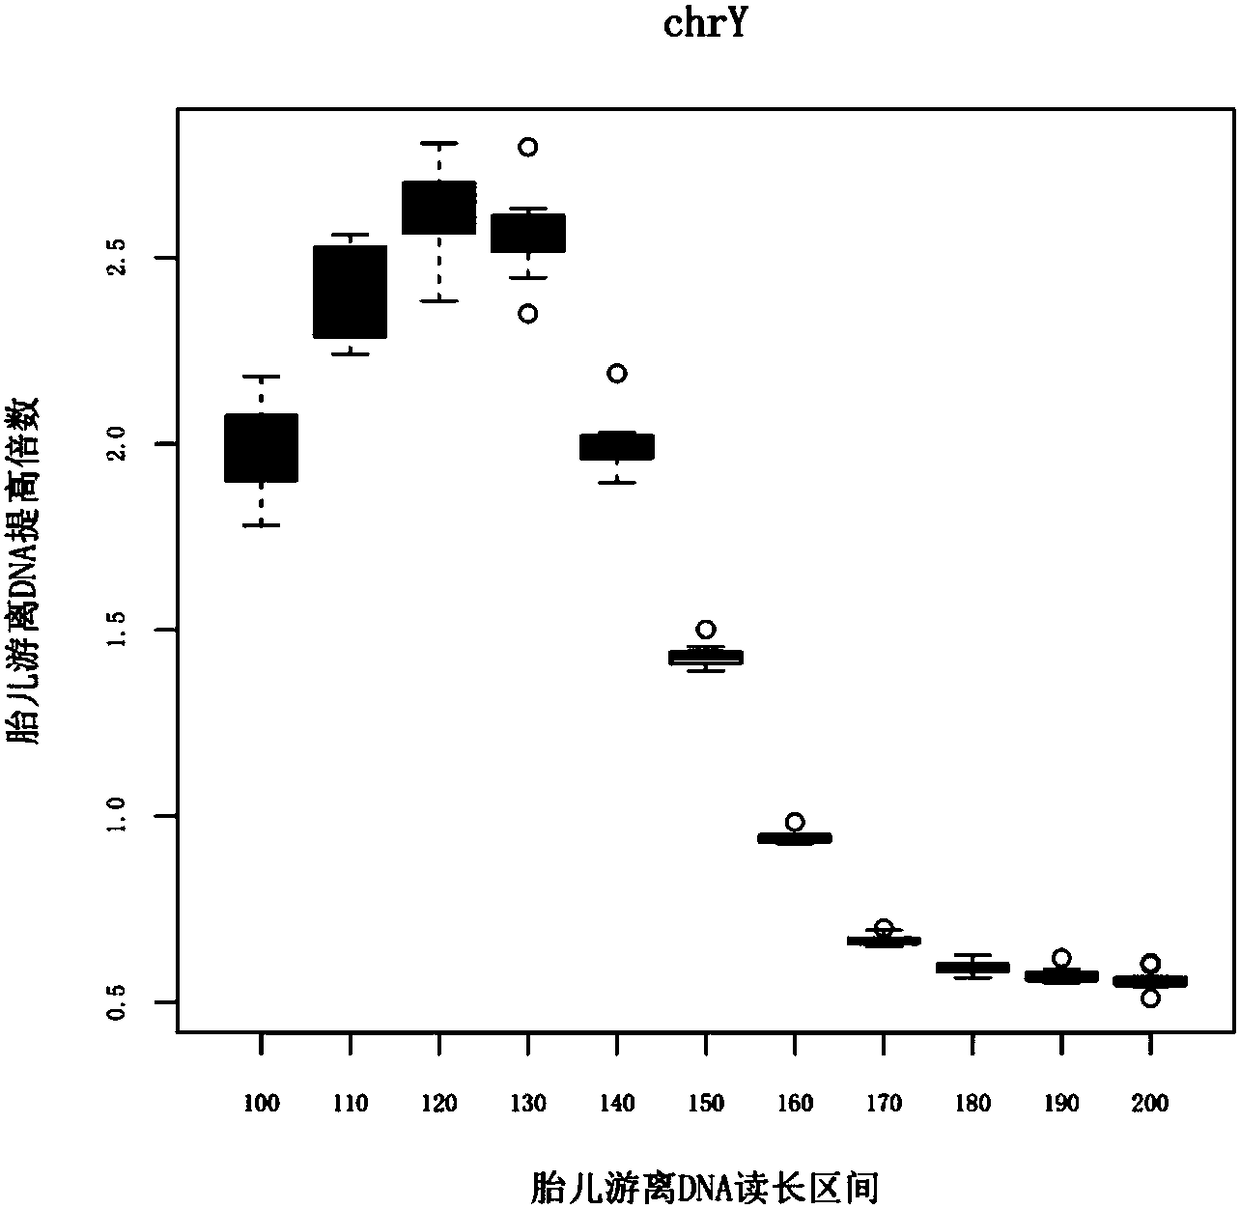 Kit, device and method for increasing fetal free dna concentration in maternal peripheral blood